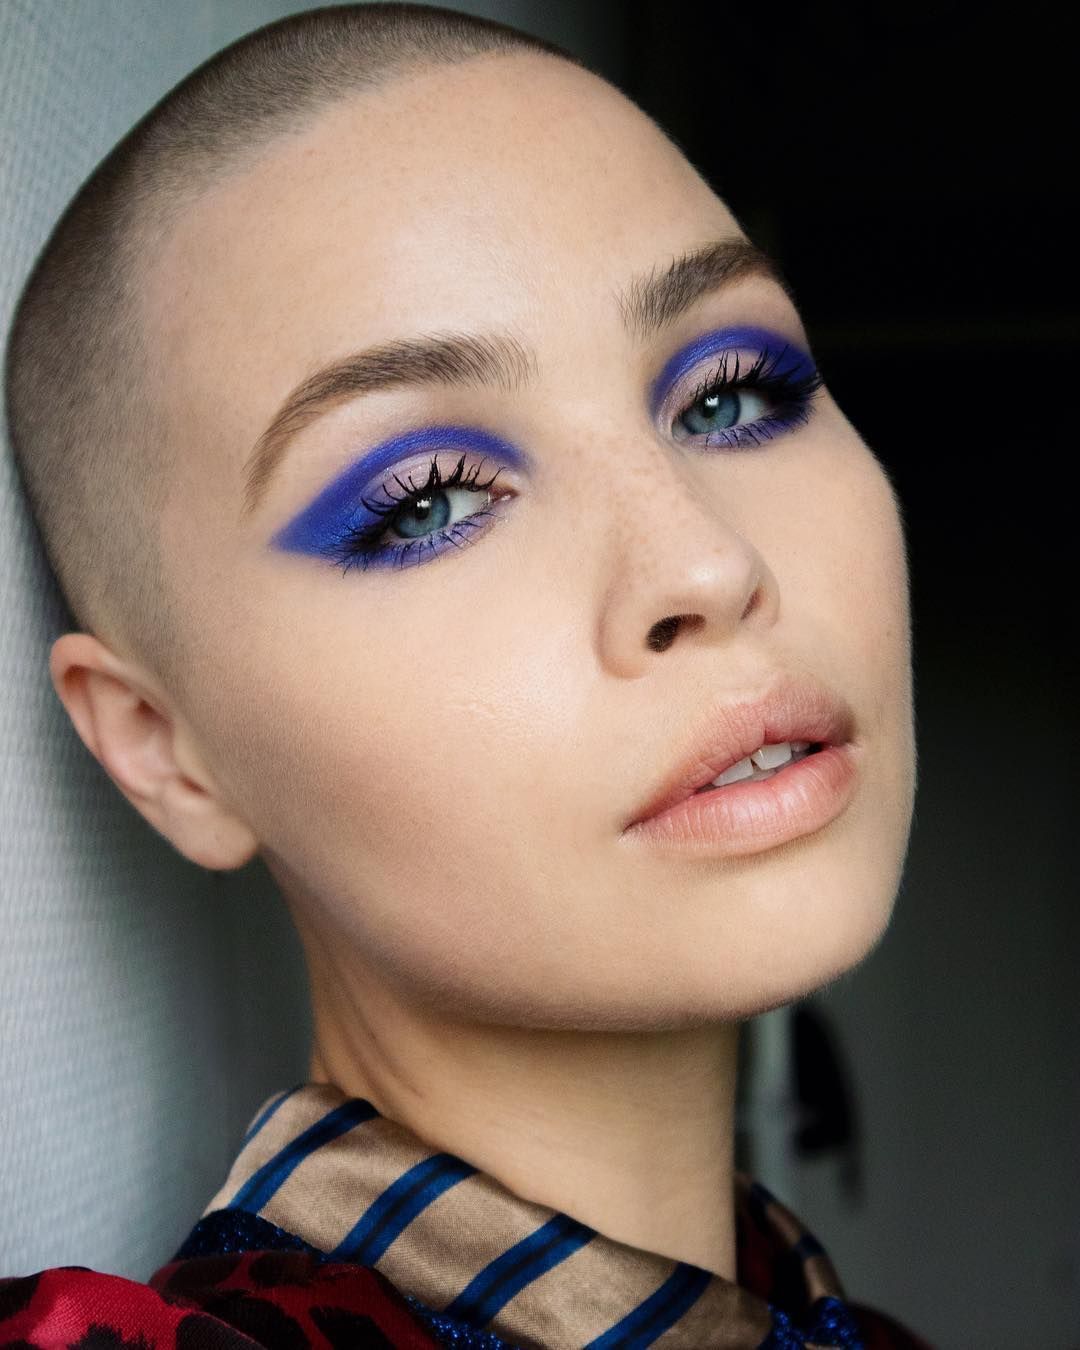 21 Abstract Makeup Looks That Are Totally Selfie-Worthy | I AM & CO® - 21 Abstract Makeup Looks That Are Totally Selfie-Worthy | I AM & CO® -   13 beauty Makeup photography ideas